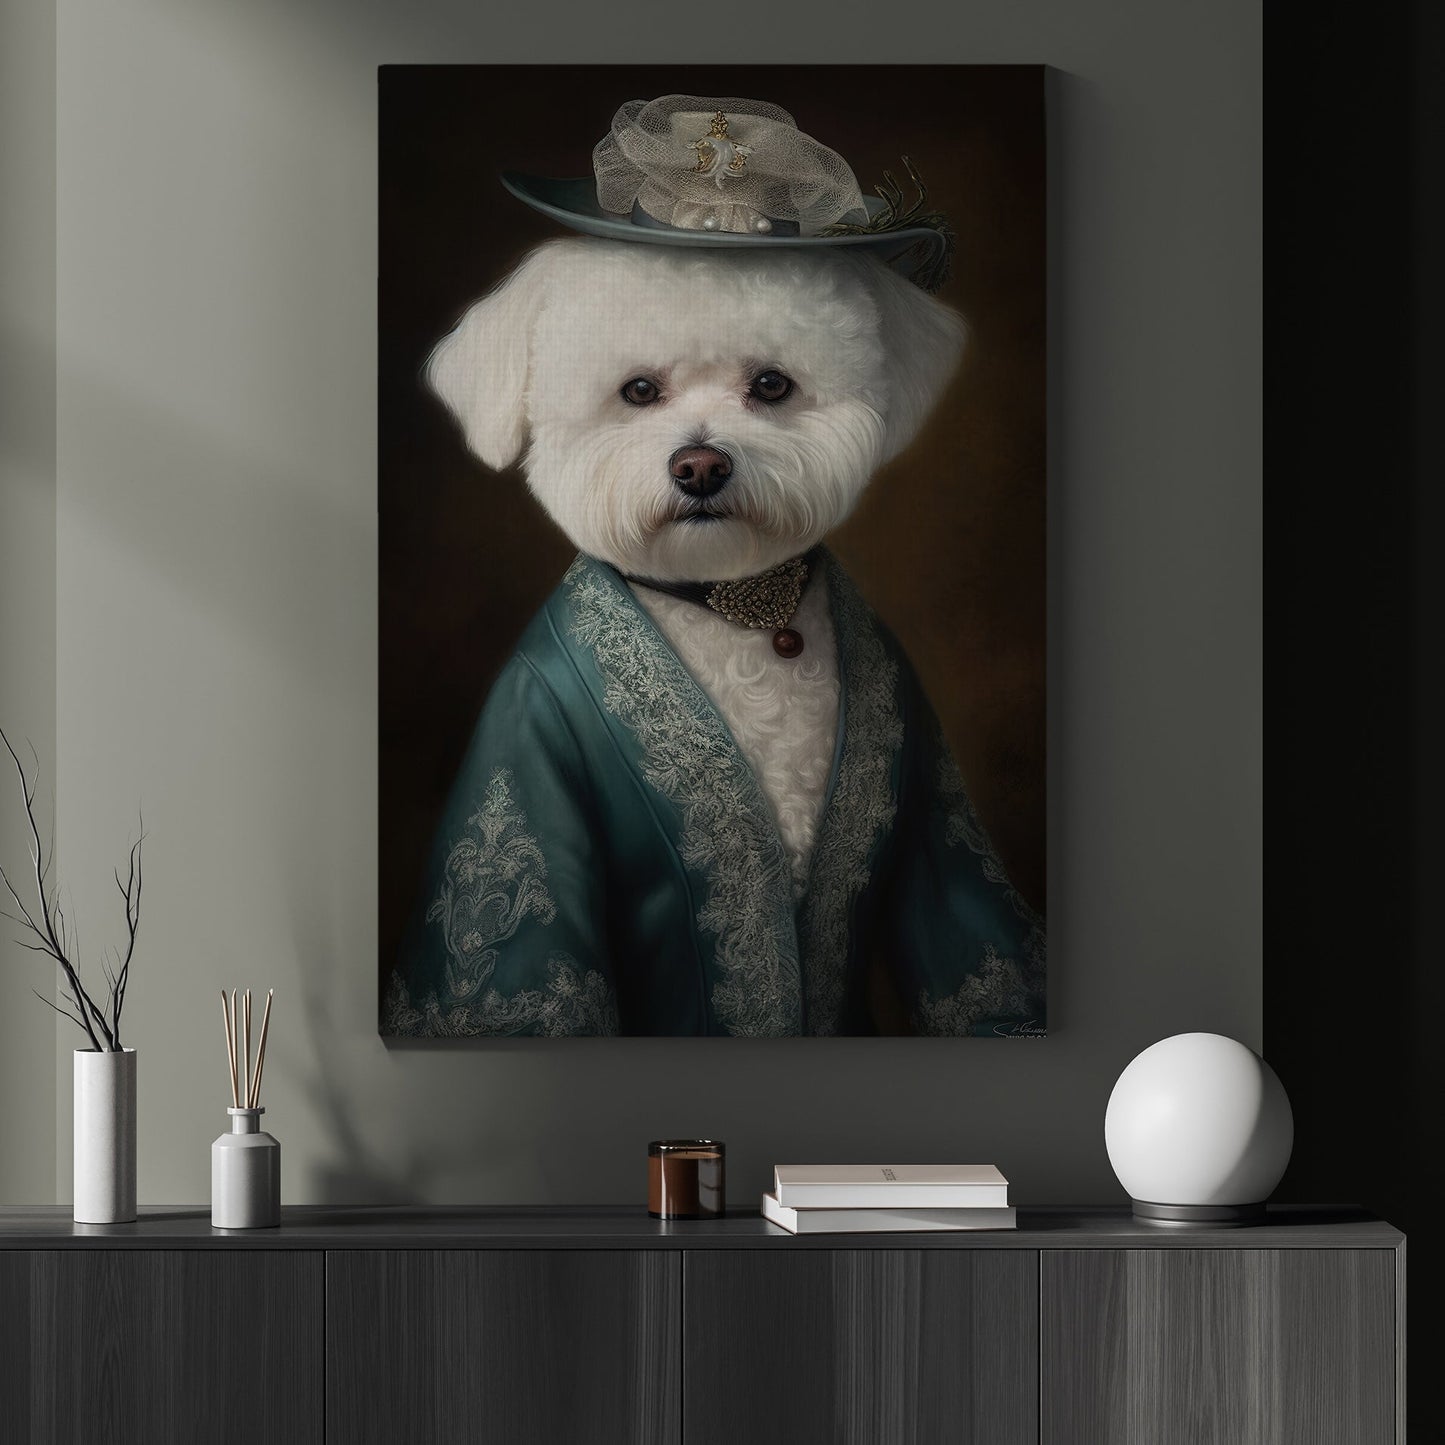 Gentlemen Bichon Frise Suit Style, Victorian Dog Canvas Painting, Victorian Animal Wall Art Decor, Poster Gift For Bichon Frise Lovers